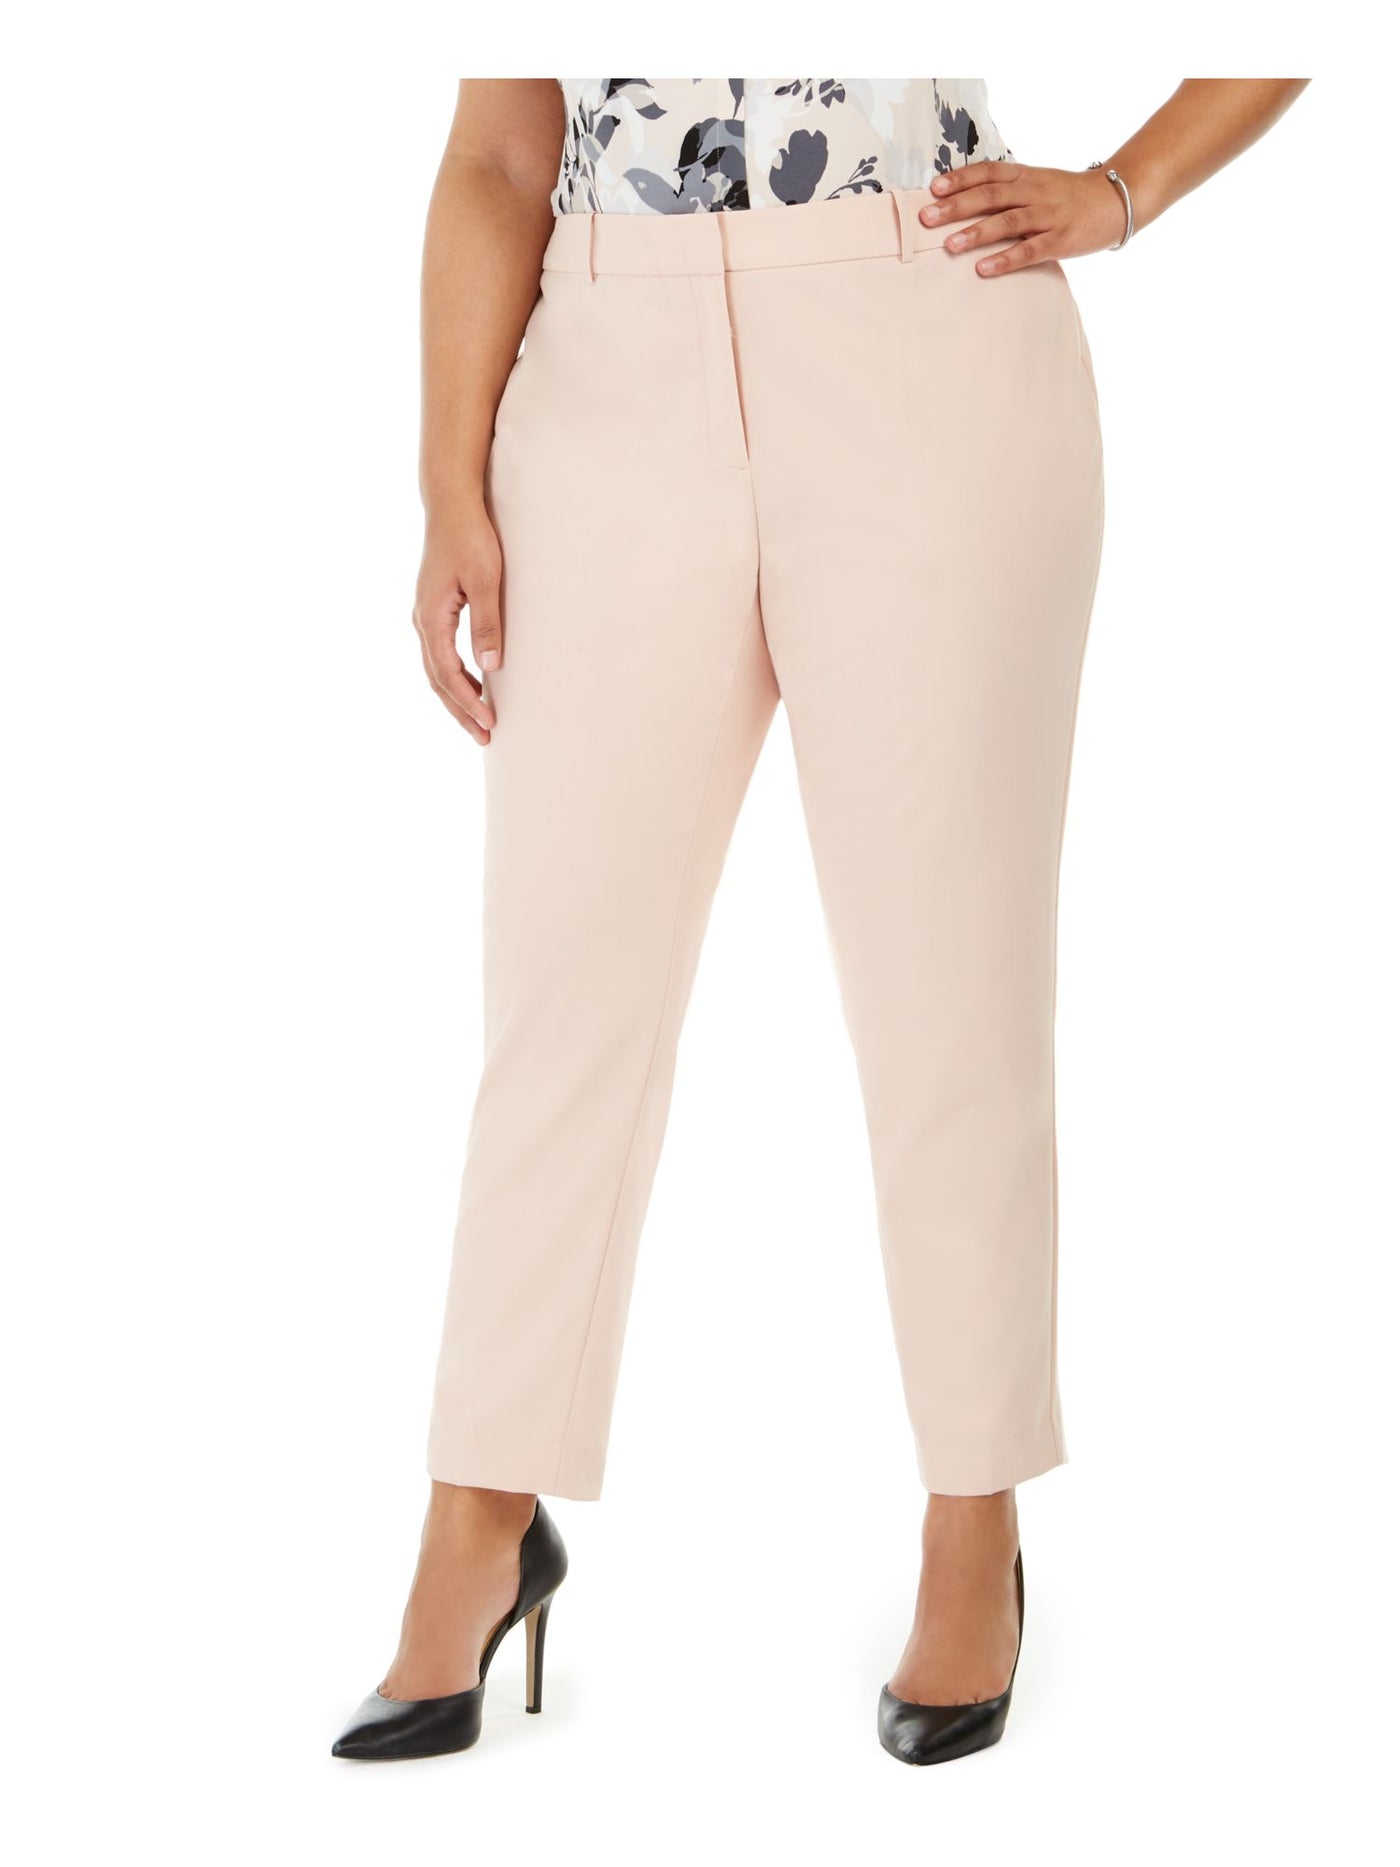 CALVIN KLEIN Womens Pink Stretch Zippered Pocketed Wear To Work Straight leg Pants Plus 18W